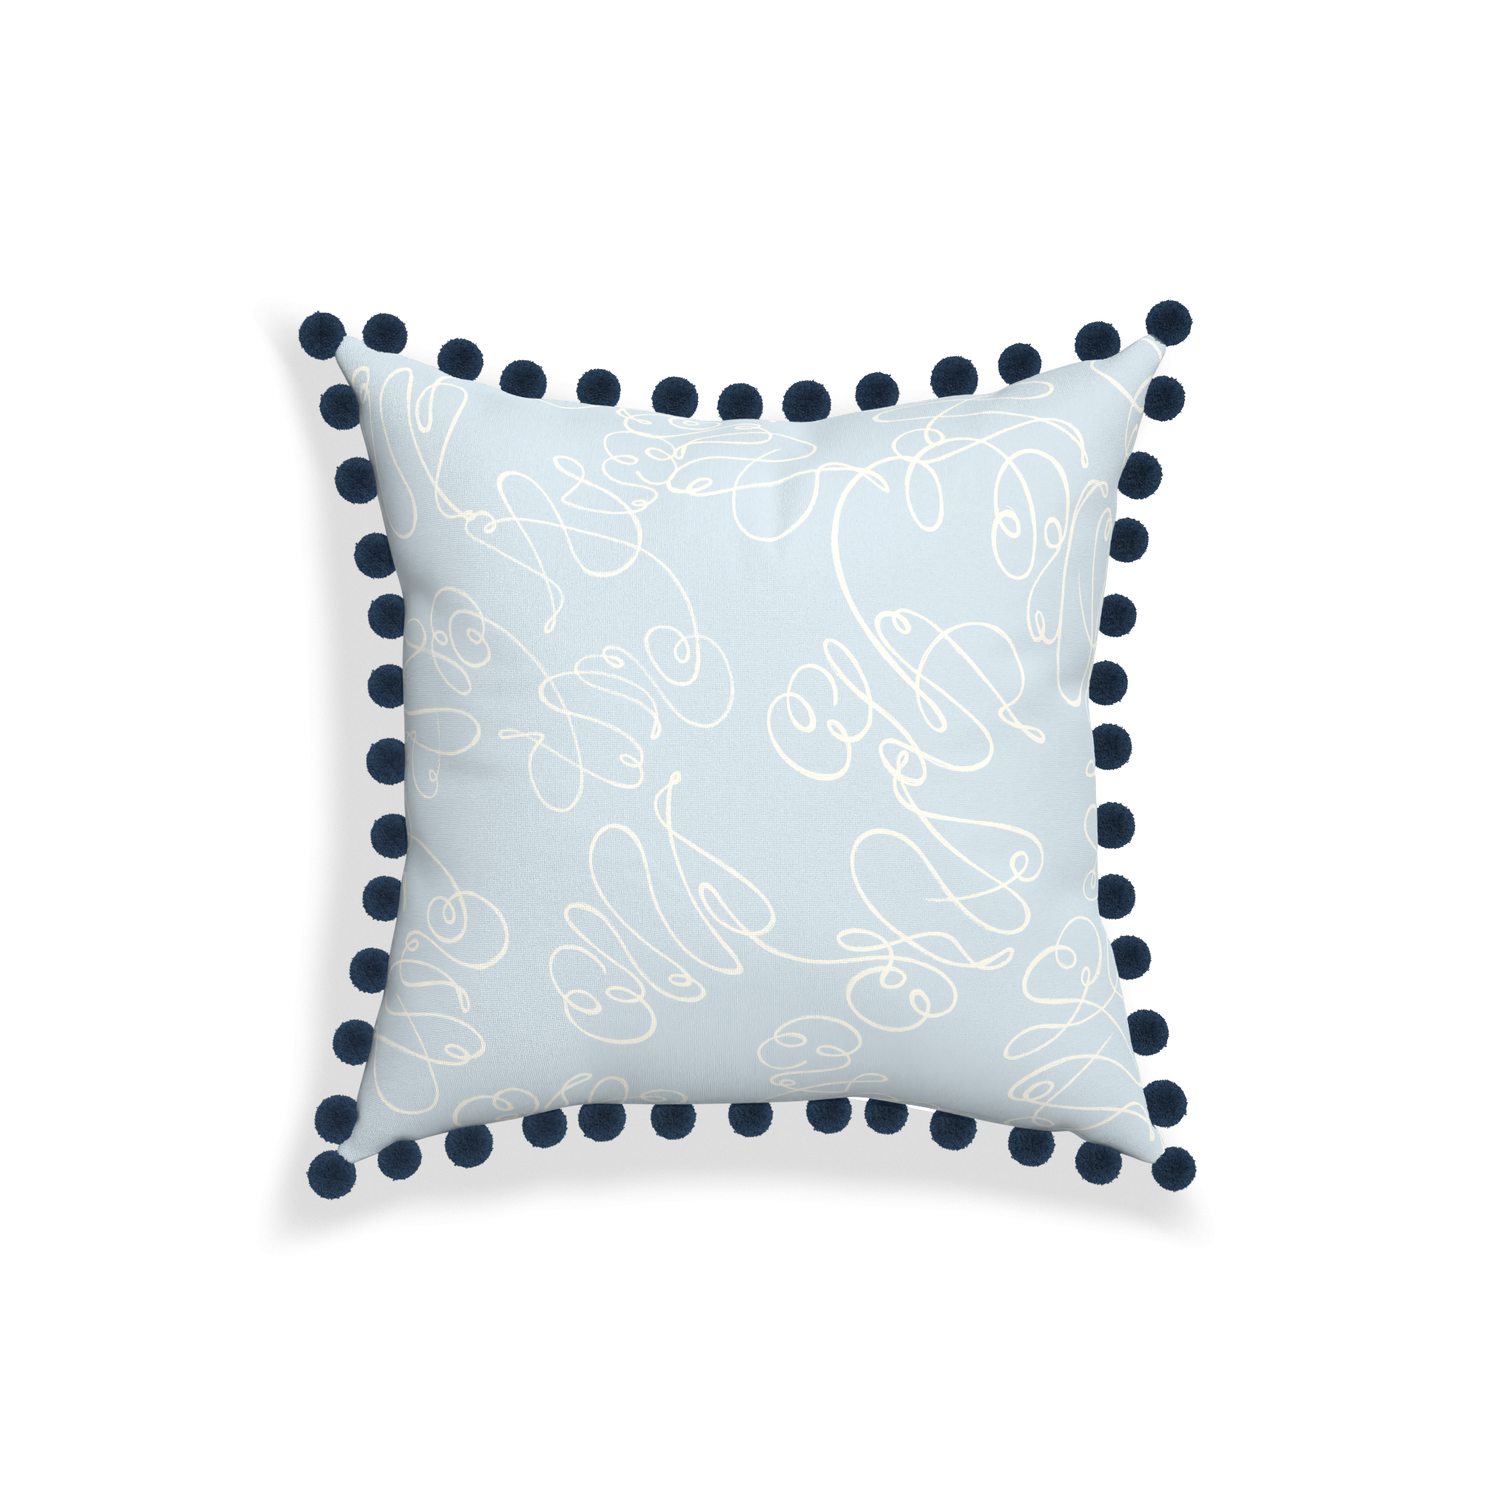 18-square mirabella custom powder blue abstractpillow with c on white background